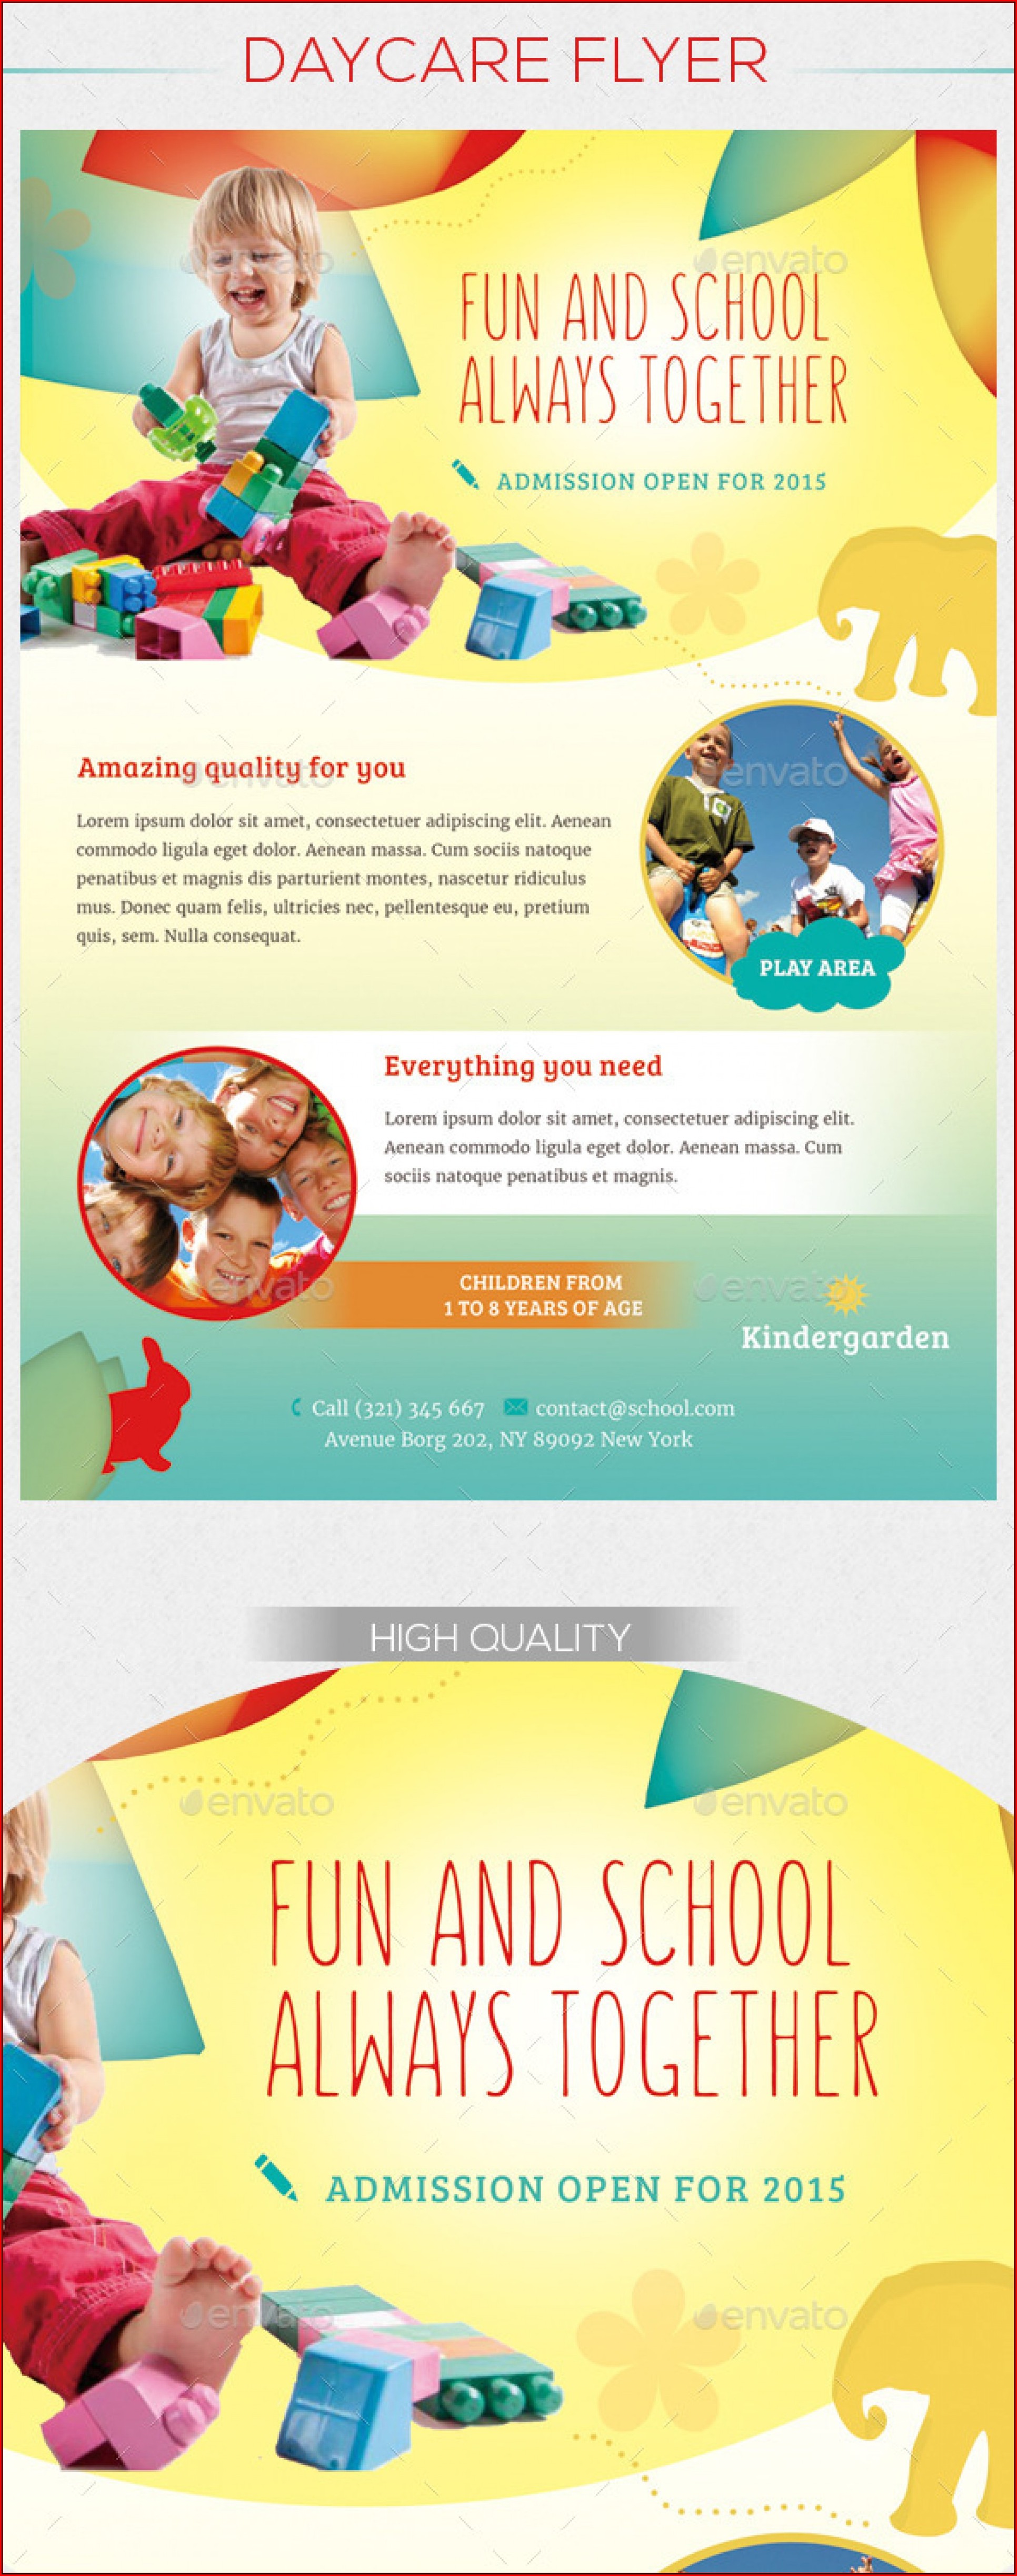 daycare-flyer-templates-free-template-1-resume-examples-x42m1ar2kg